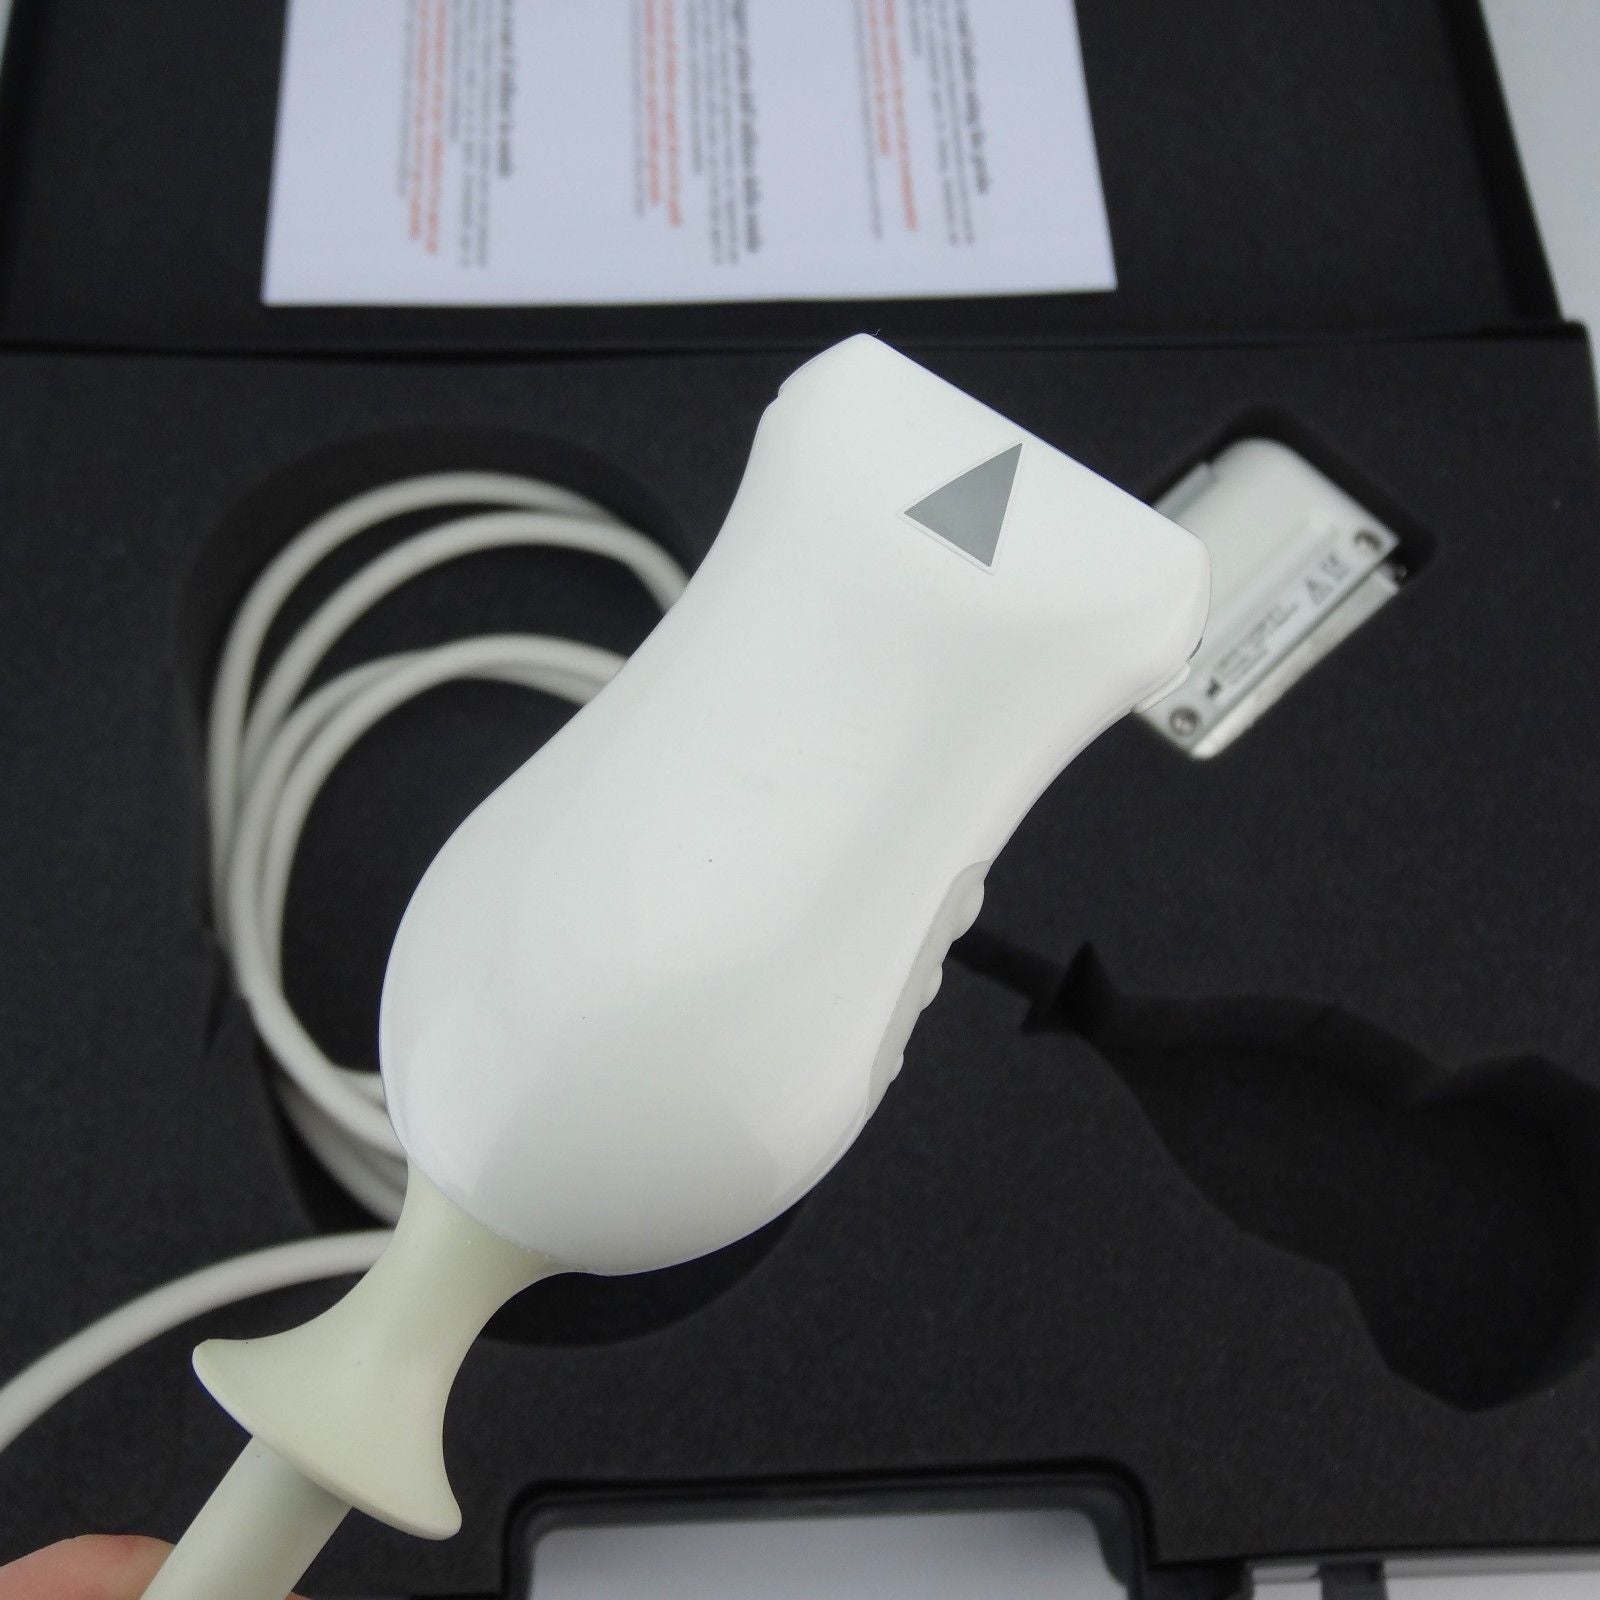 Esaote SL3235 Linear Ultrasound Transducer Probe 28mm, 18-6 MHz DIAGNOSTIC ULTRASOUND MACHINES FOR SALE